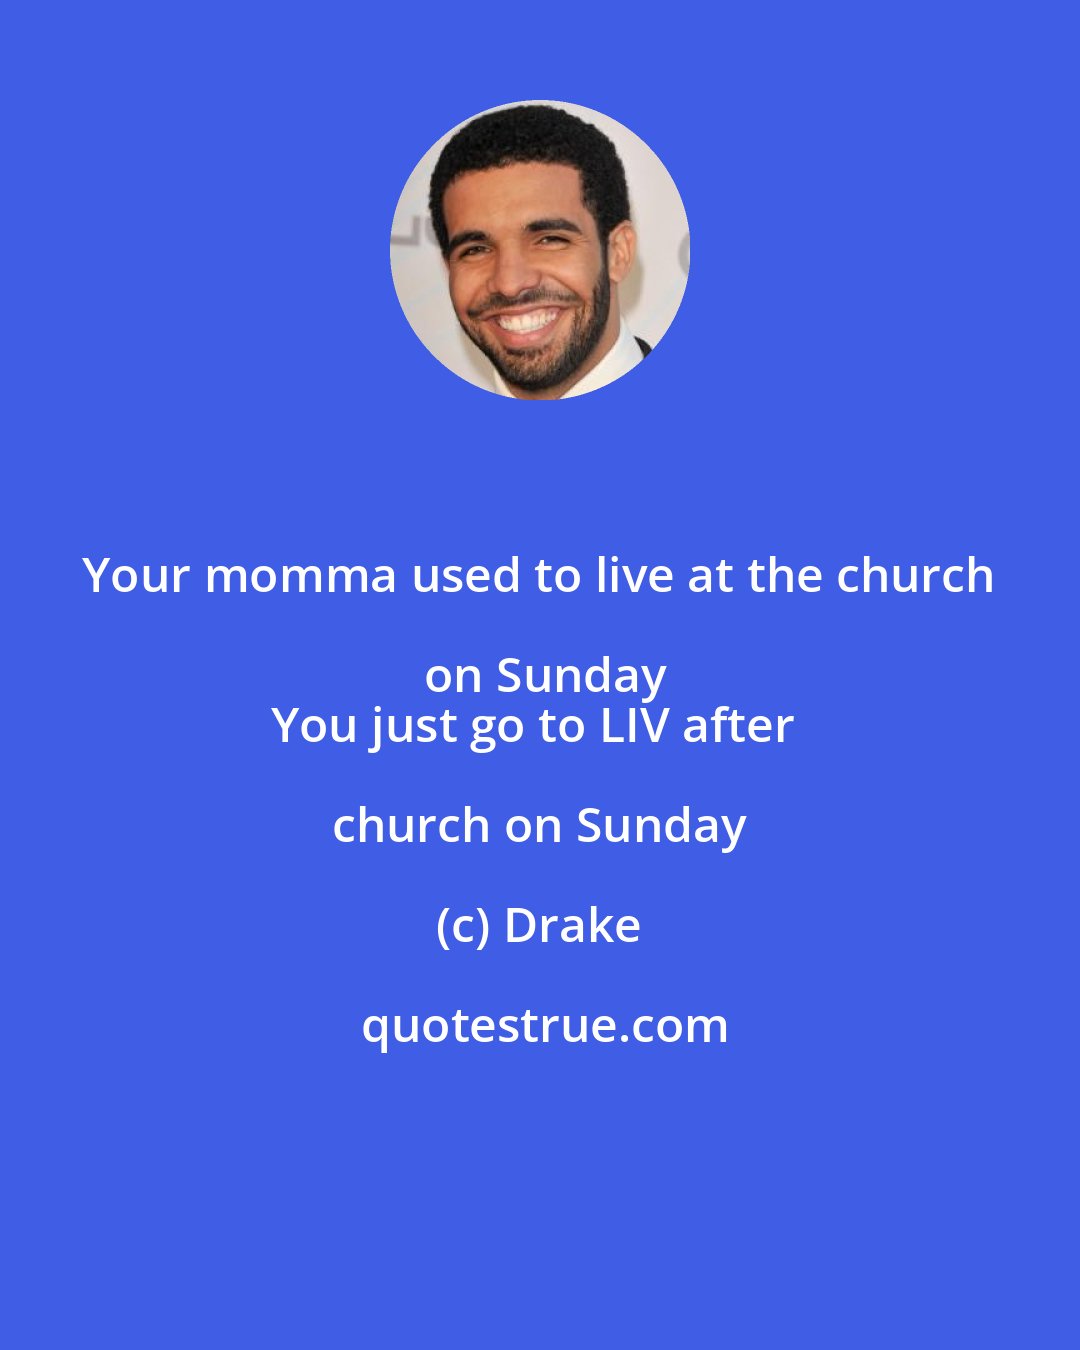 Drake: Your momma used to live at the church on Sunday
You just go to LIV after church on Sunday